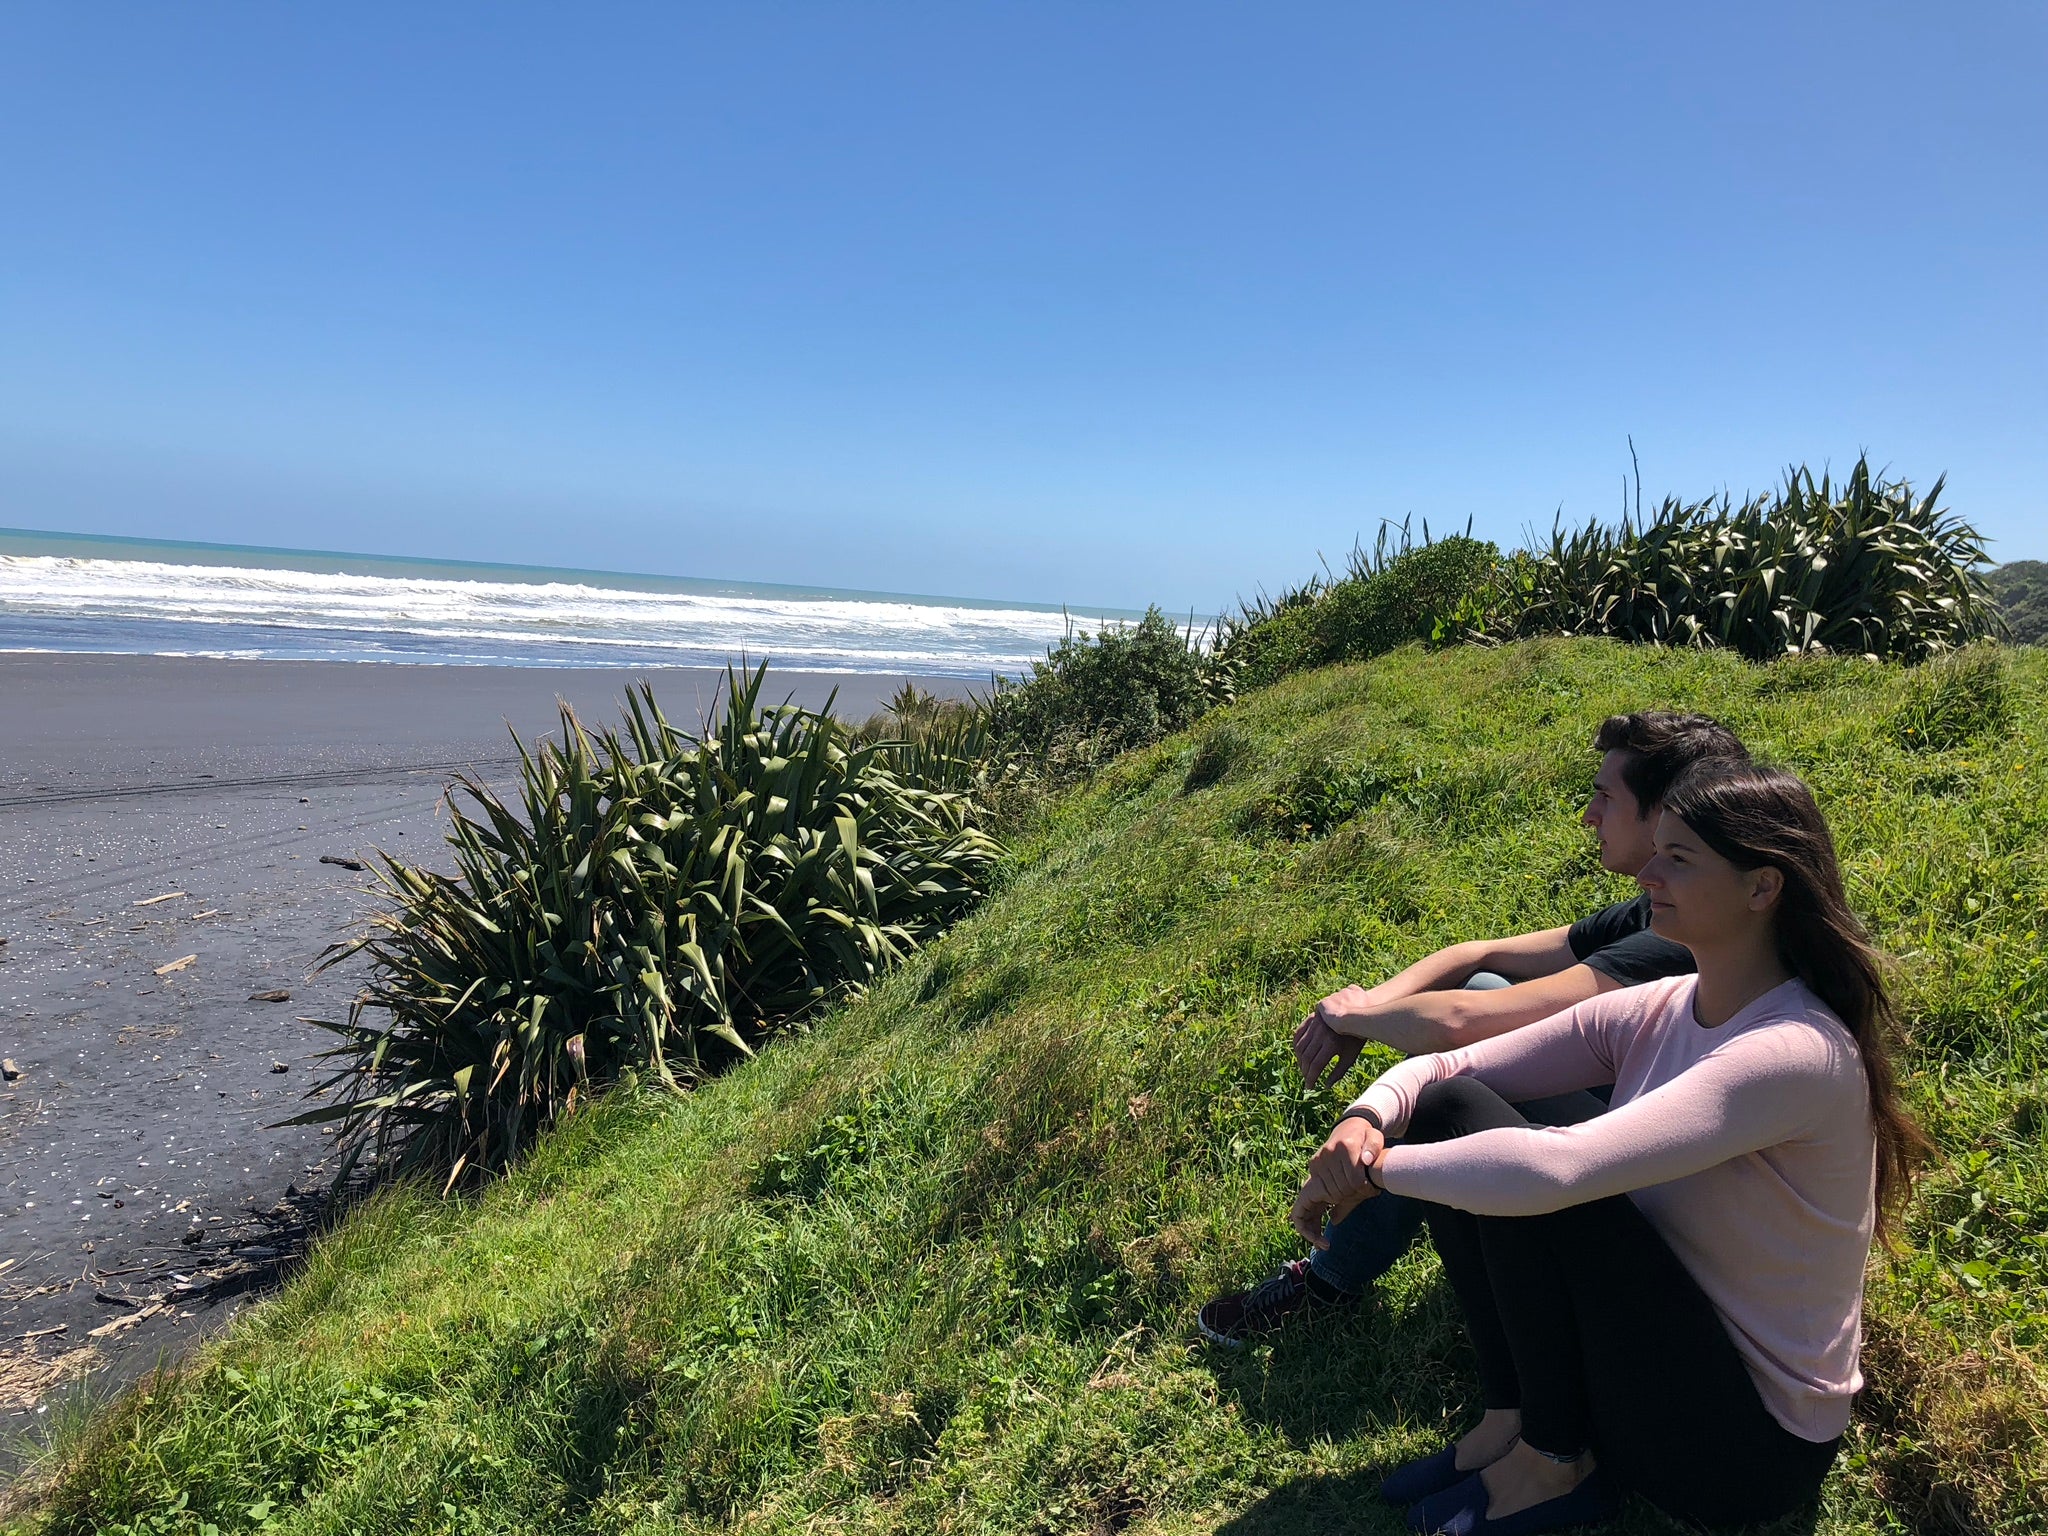 Magic in the Mundane: A New Zealand Travel Story